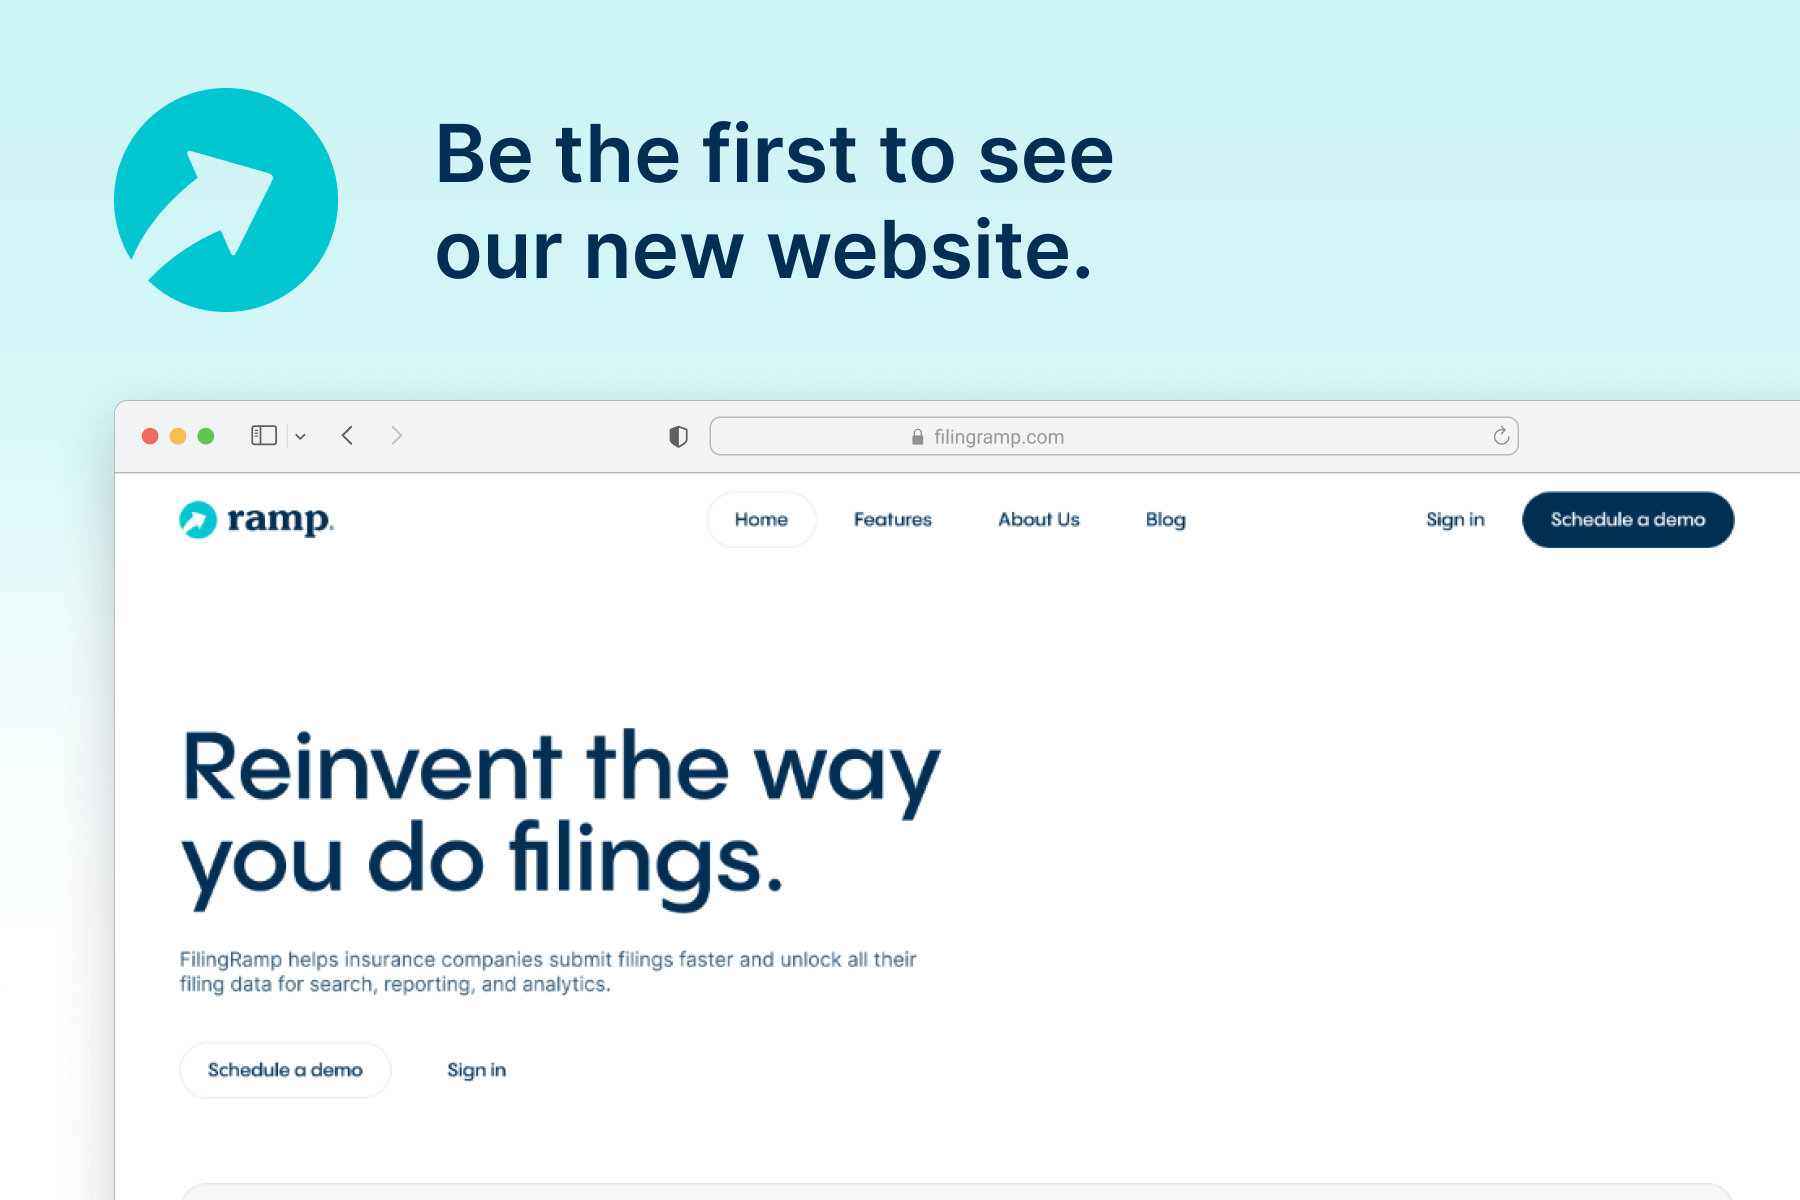 FilingRamp - From Faster Filings to Much, Much More